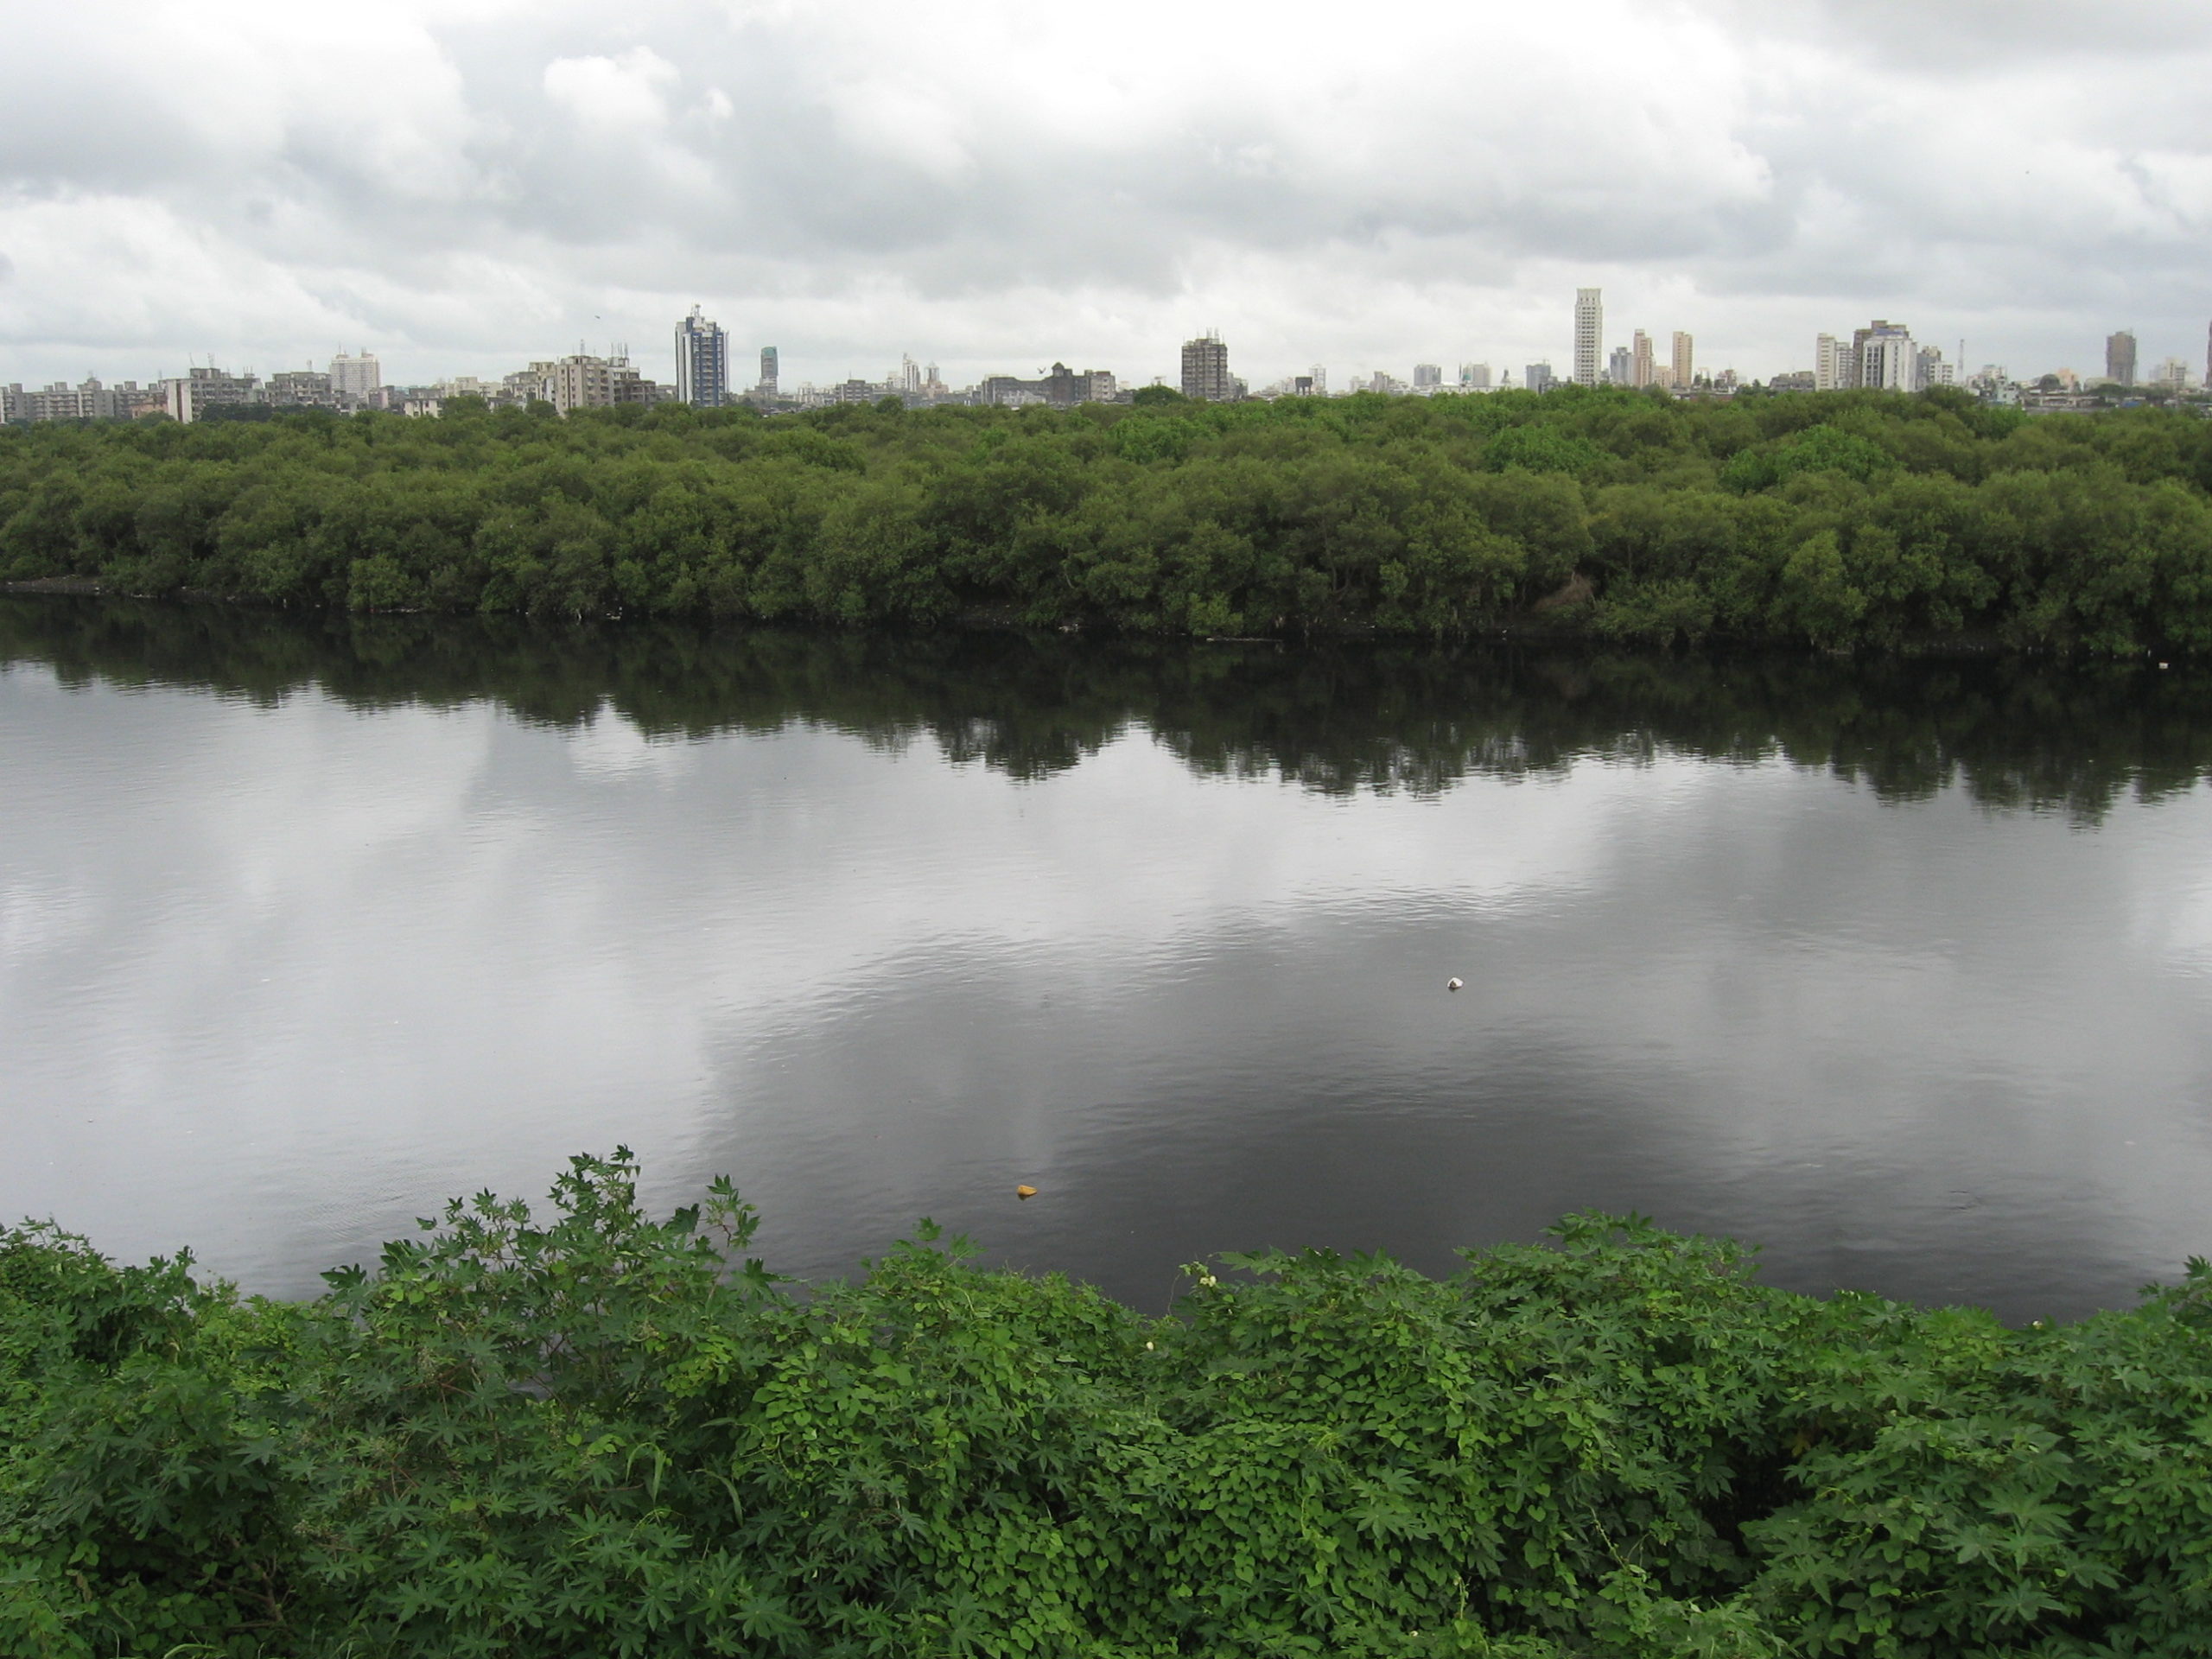 BMC to conduct awareness programs for residents to reduce waste disposal in Mithi River